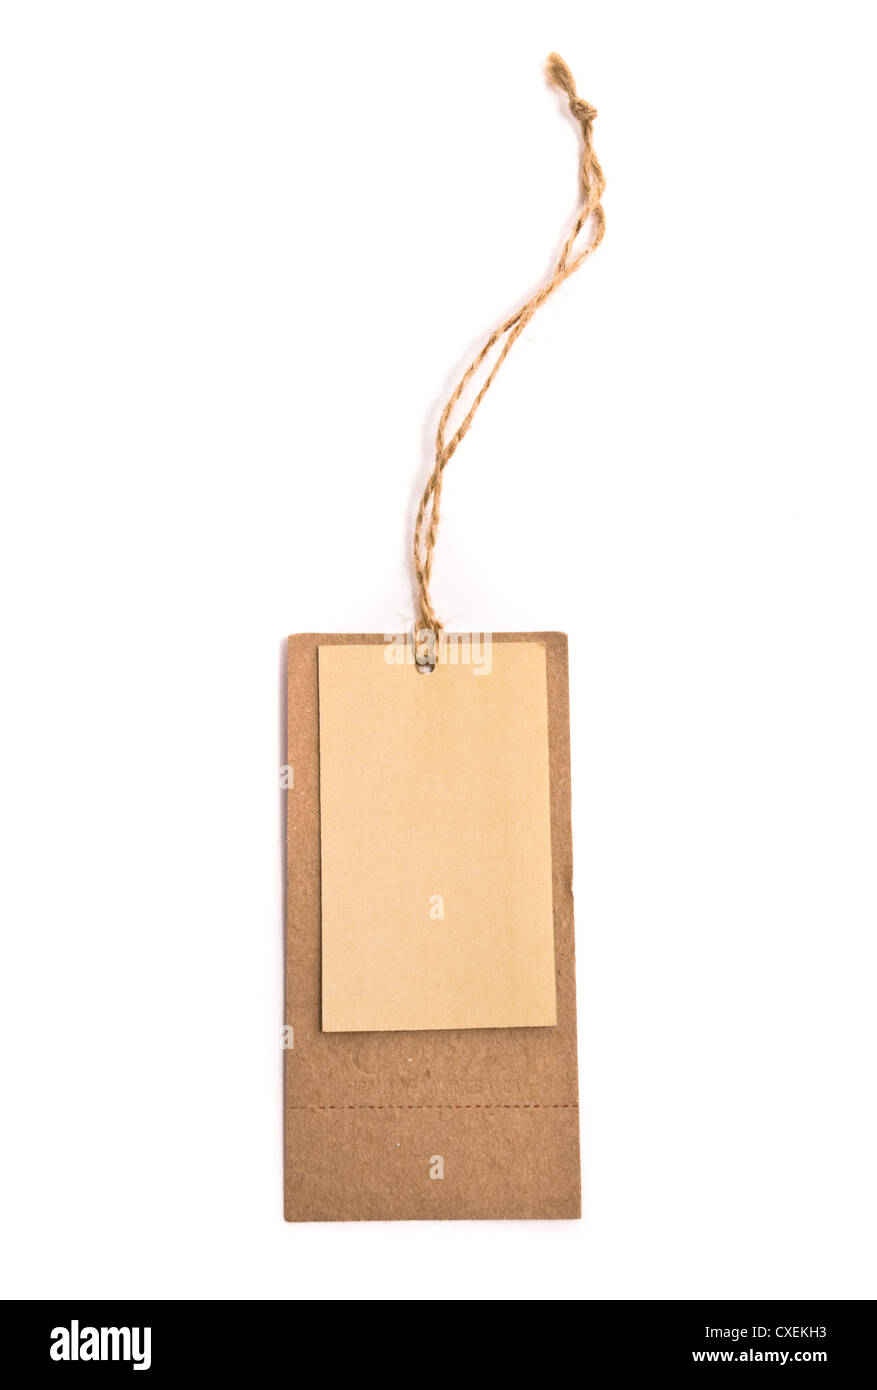 Blank tag tied with brown string. Stock Photo